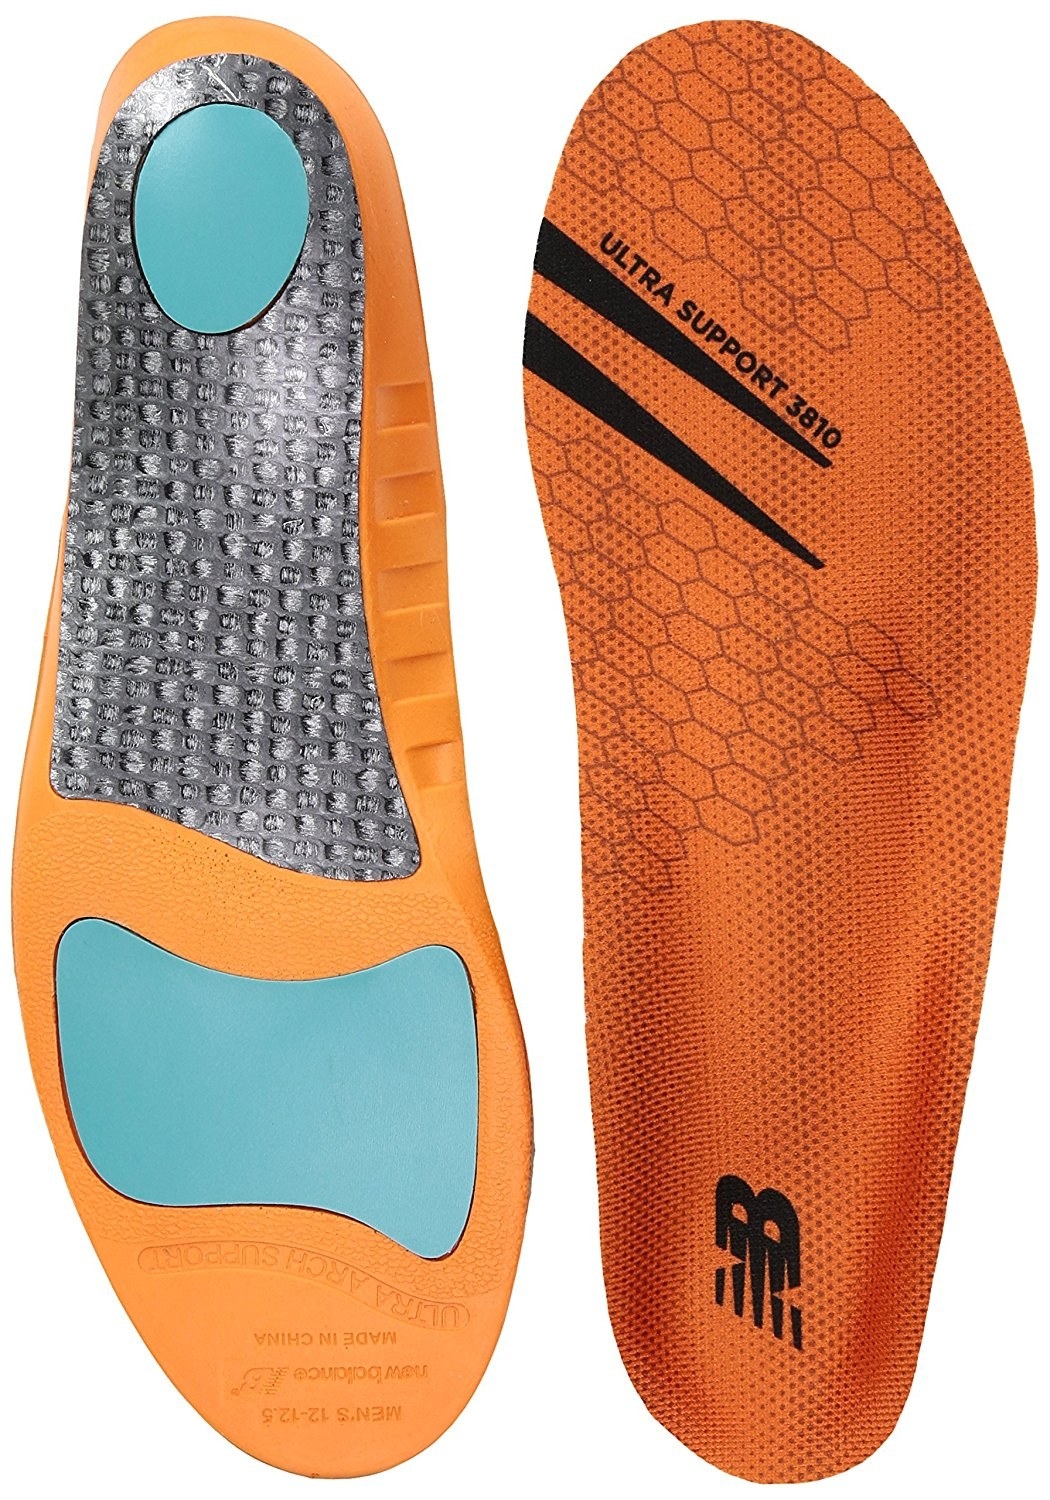 new balance insoles for supination